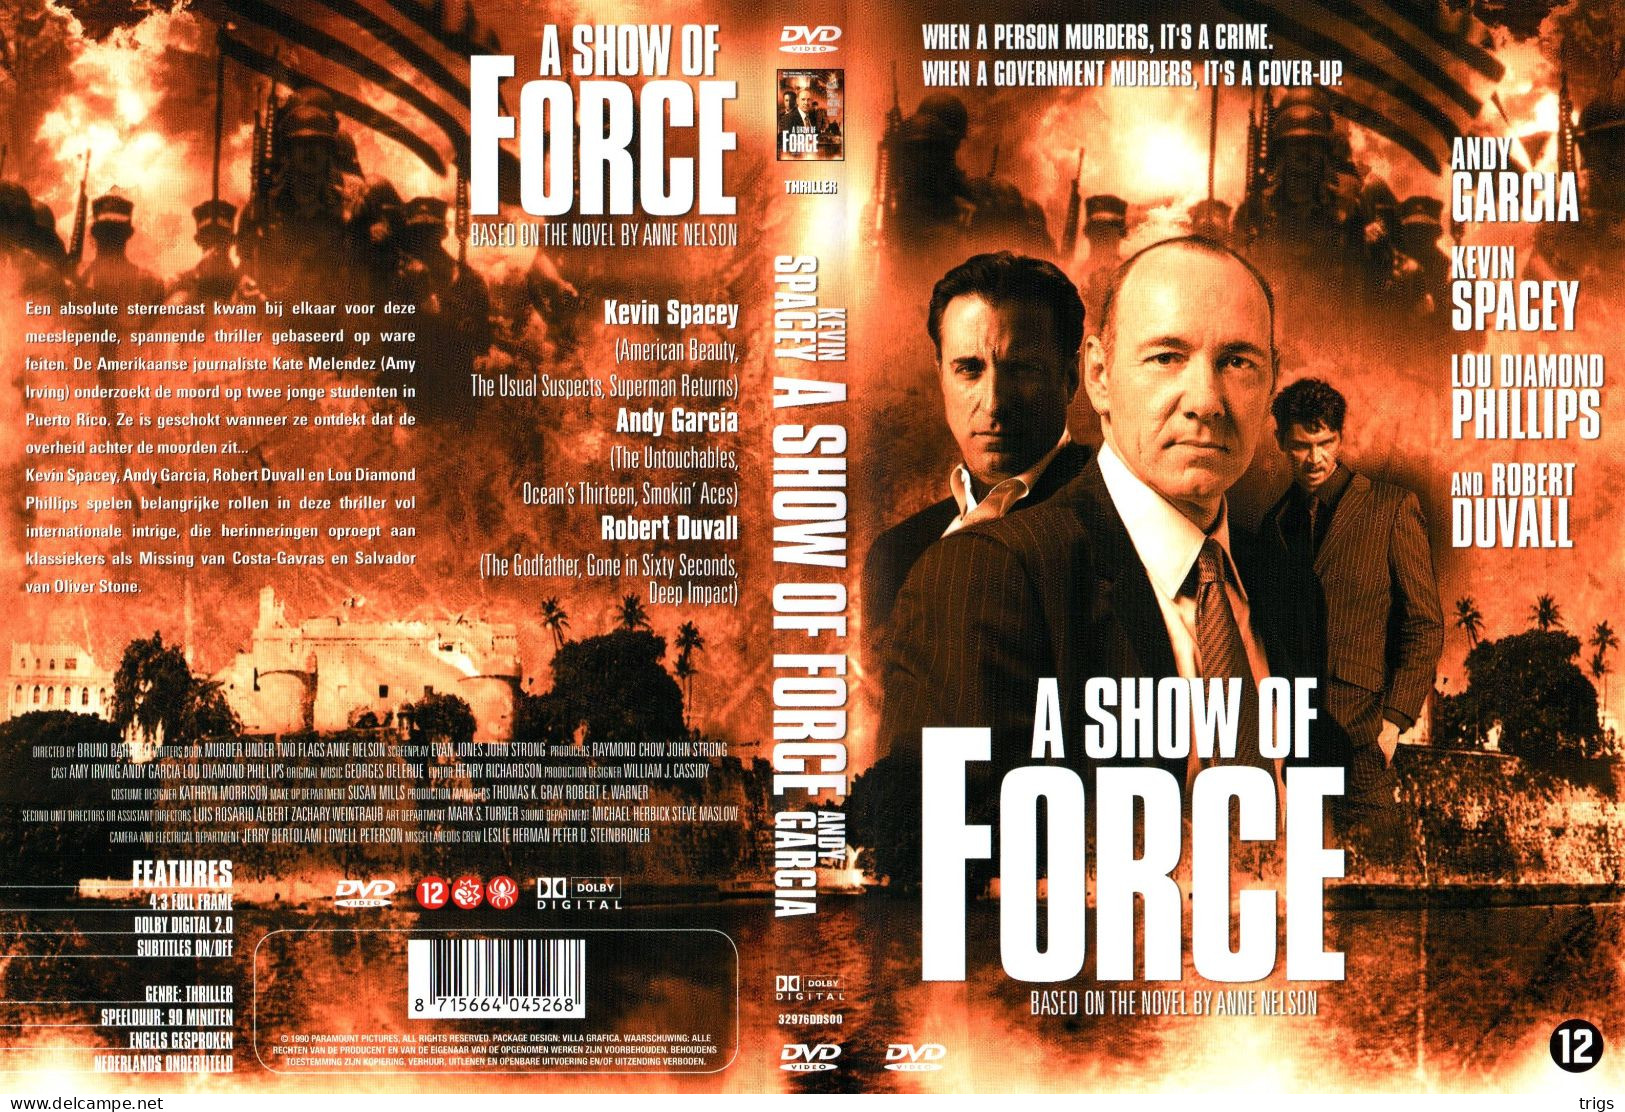 DVD - A Show Of Force - Crime